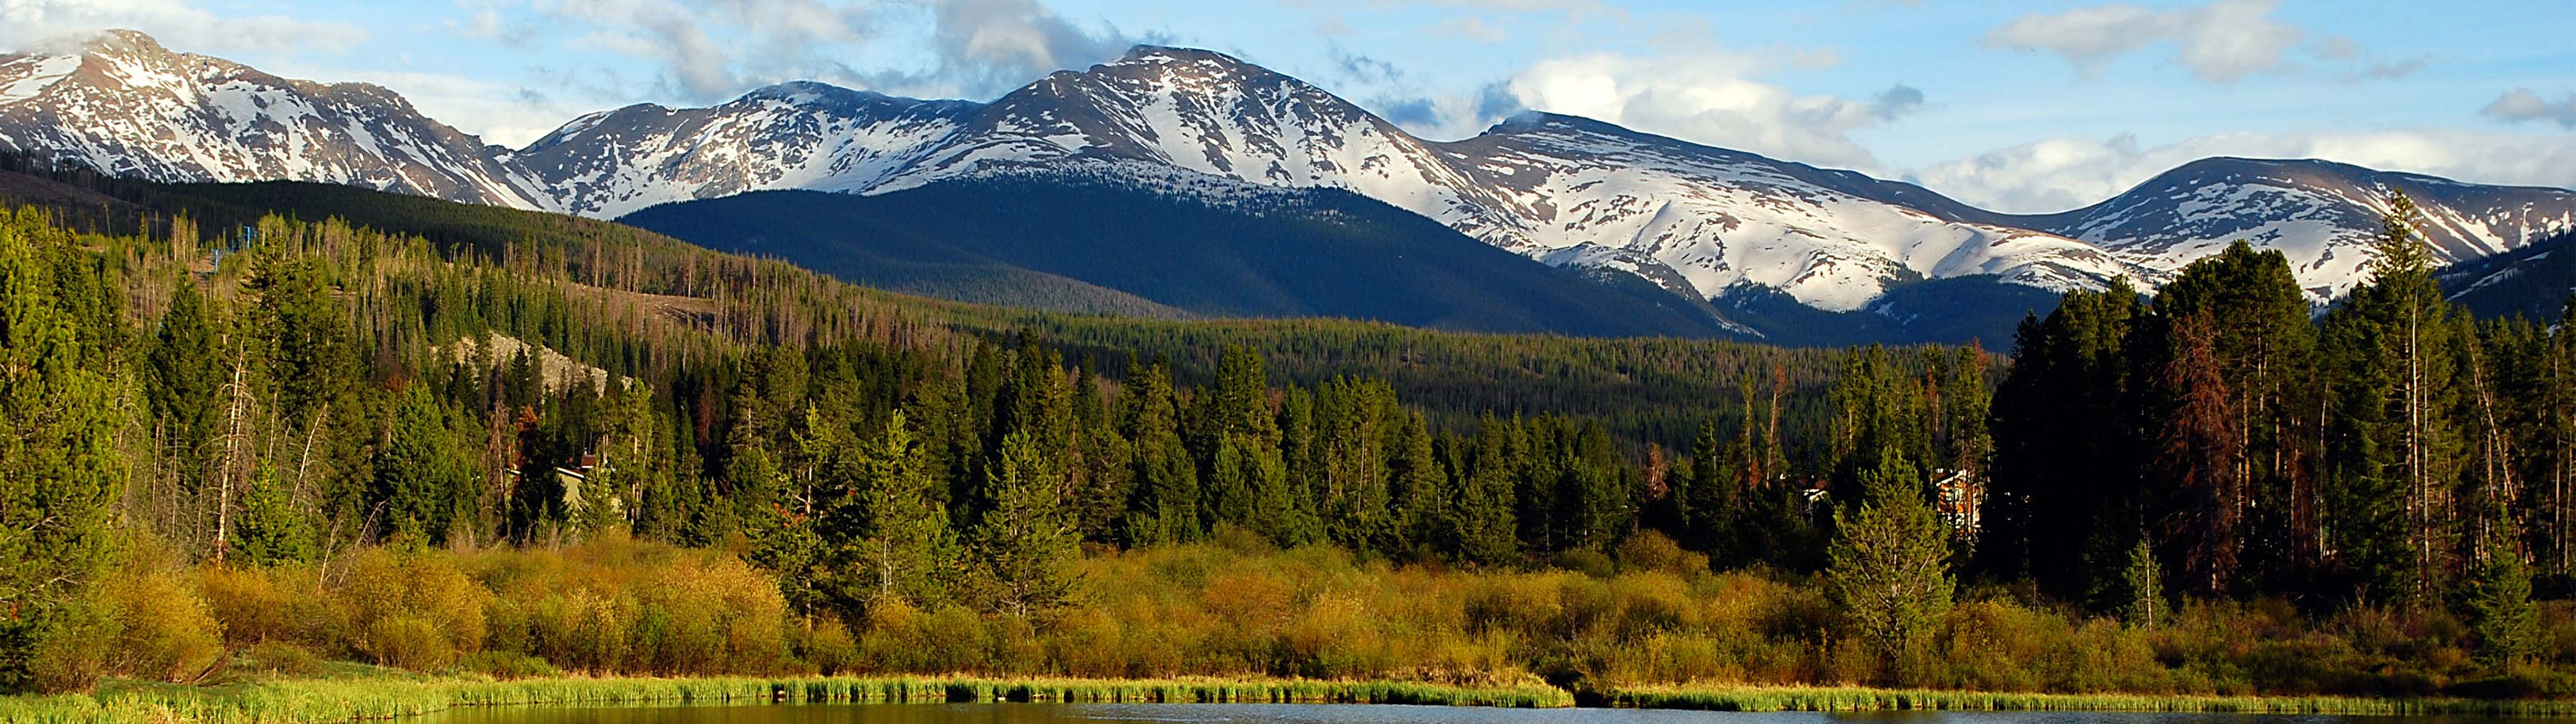 Green valleys and slopes lie before the imposing peaks of Winter Park.